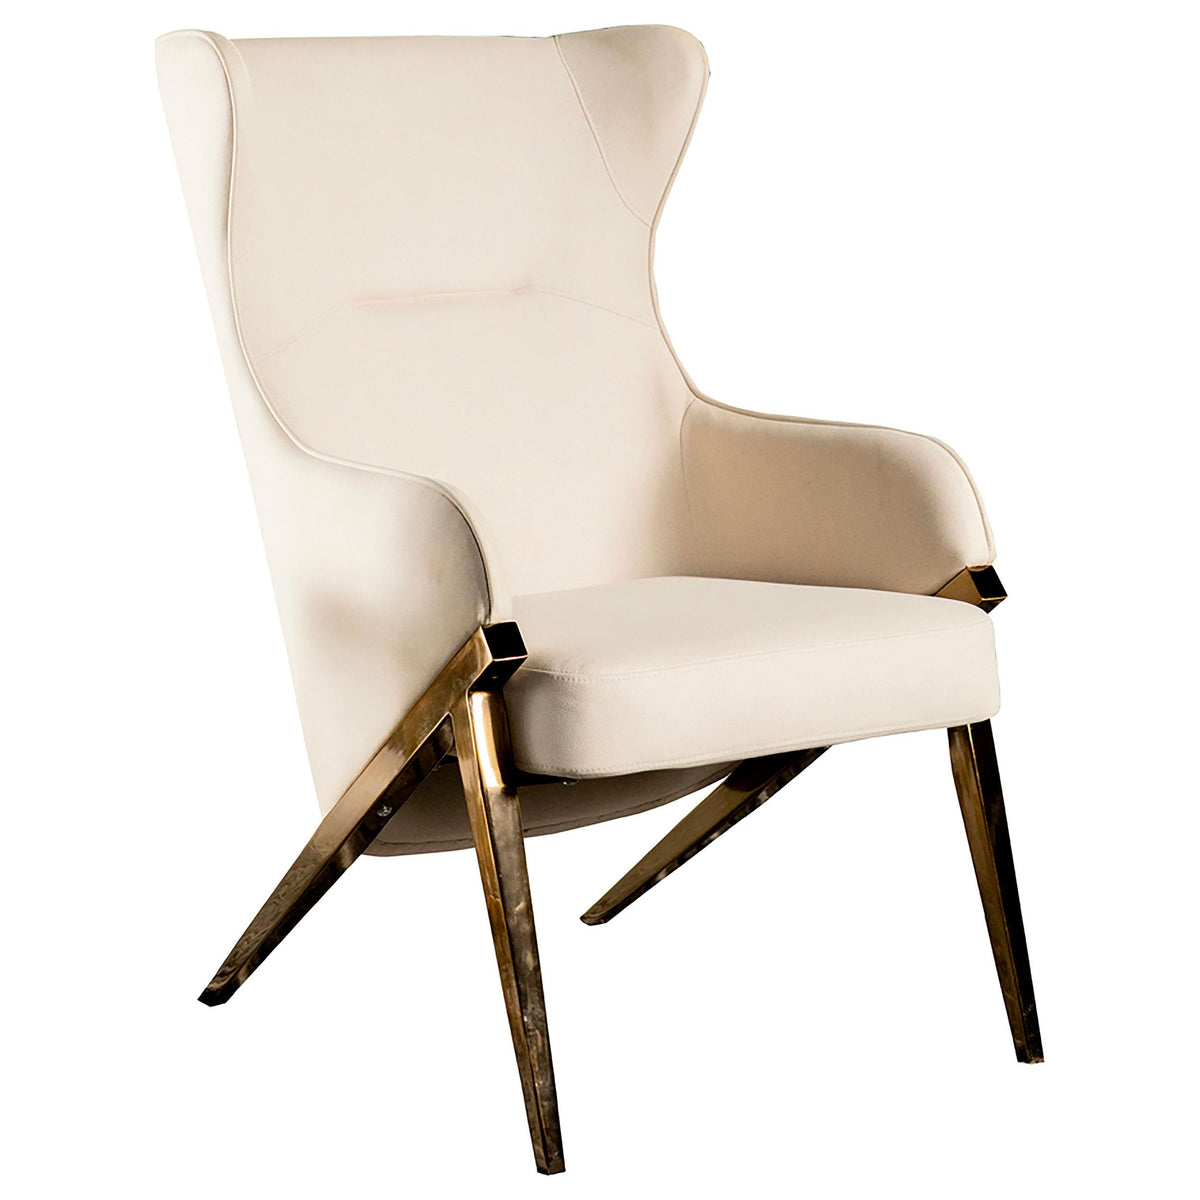 Walker Upholstered Accent Chair Cream and Bronze Walker Upholstered Accent Chair Cream and Bronze Half Price Furniture